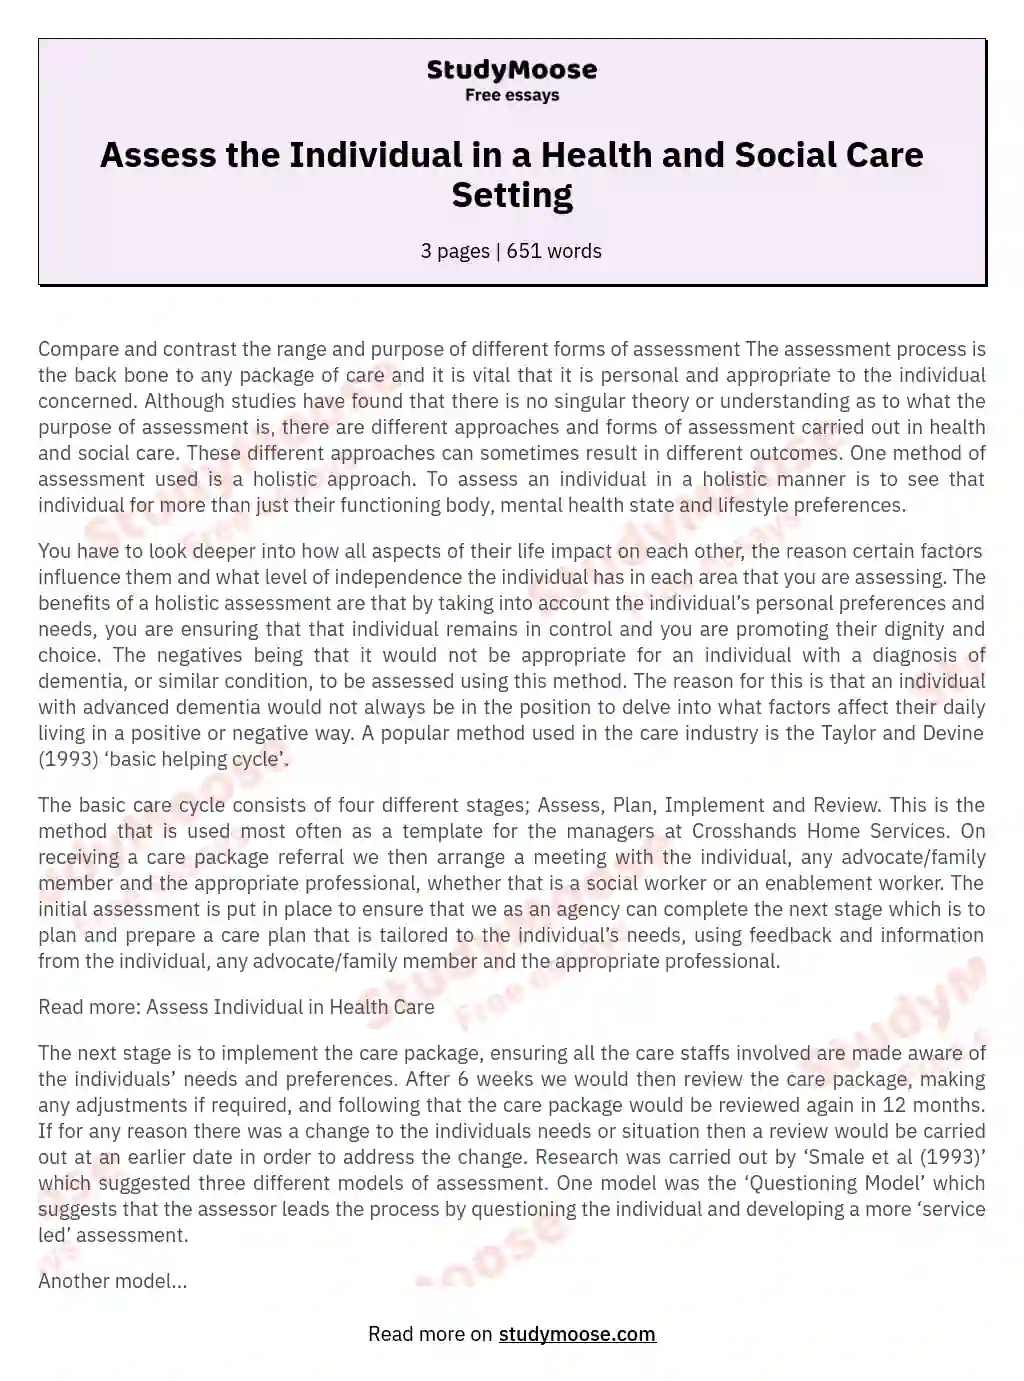 Assess the Individual in a Health and Social Care Setting essay